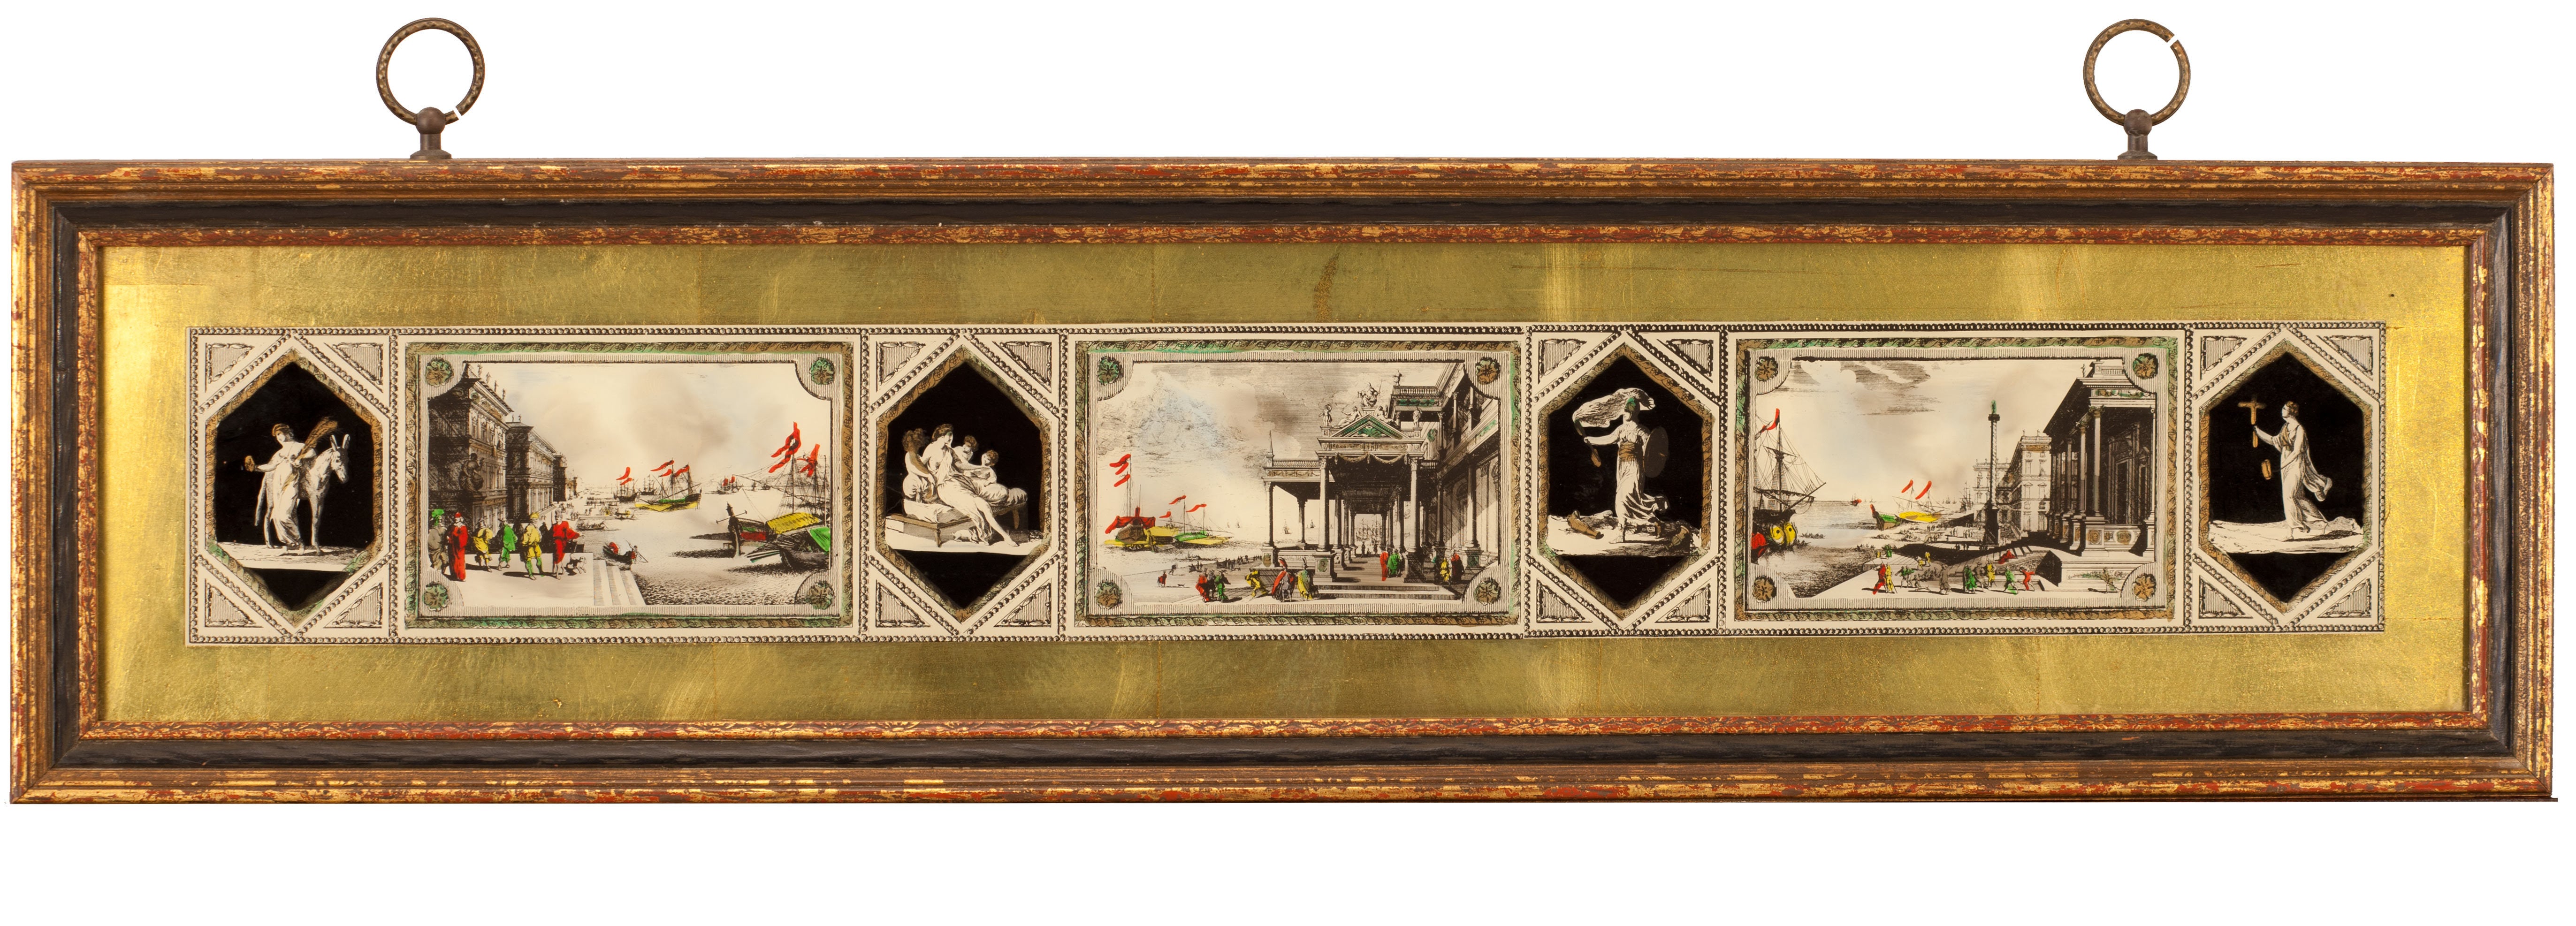 Midcentury Classical Wall Art For Sale